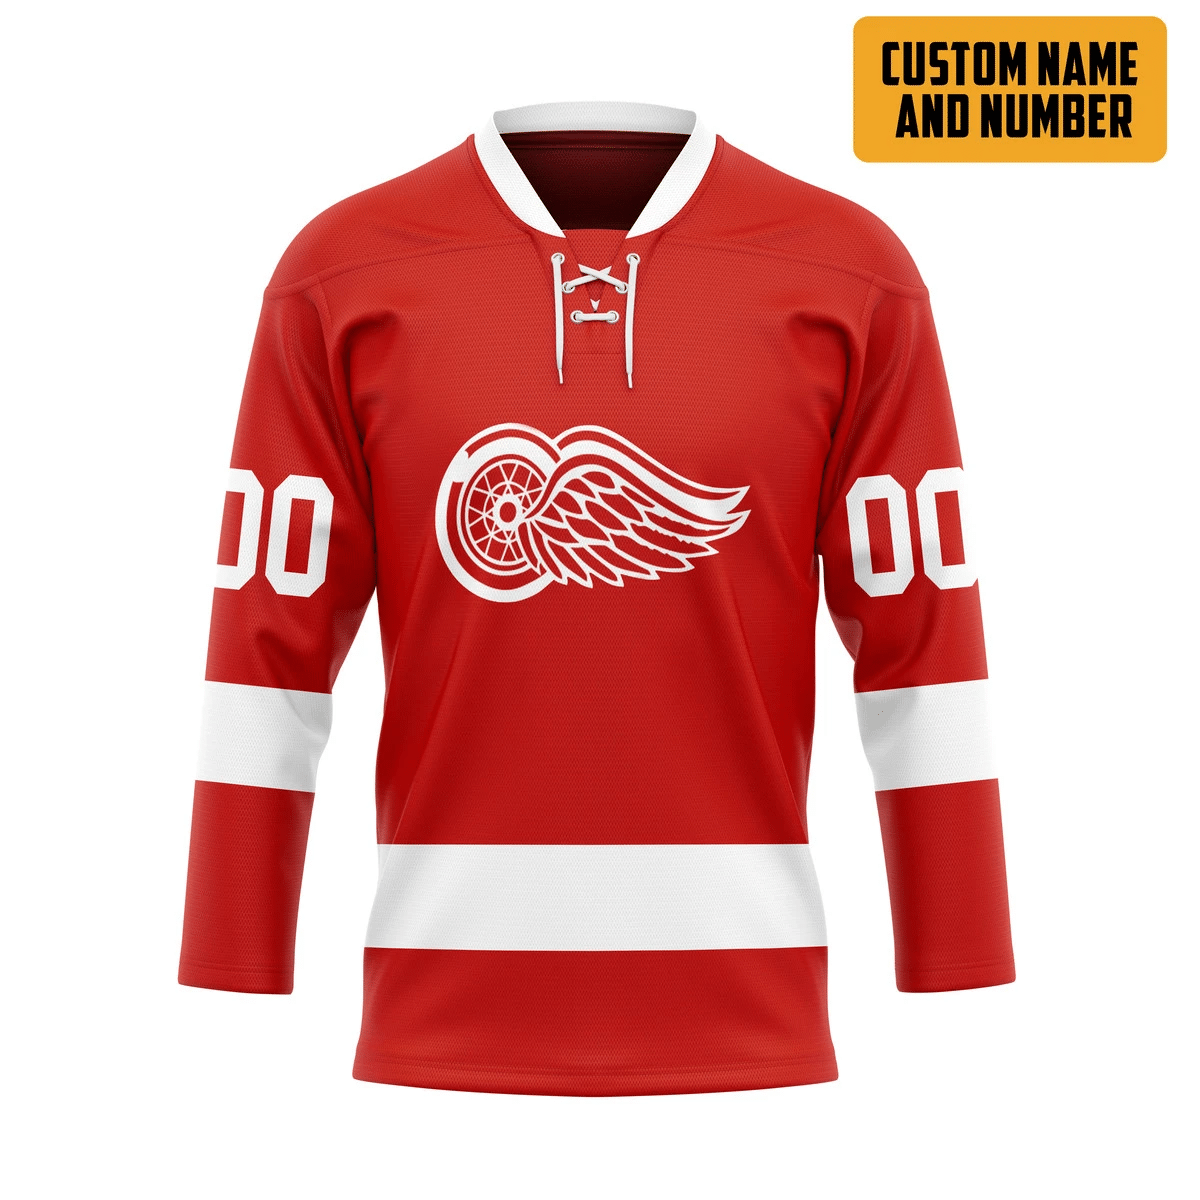 The hockey jersey is one of the most important items to have as a sports fan. 175